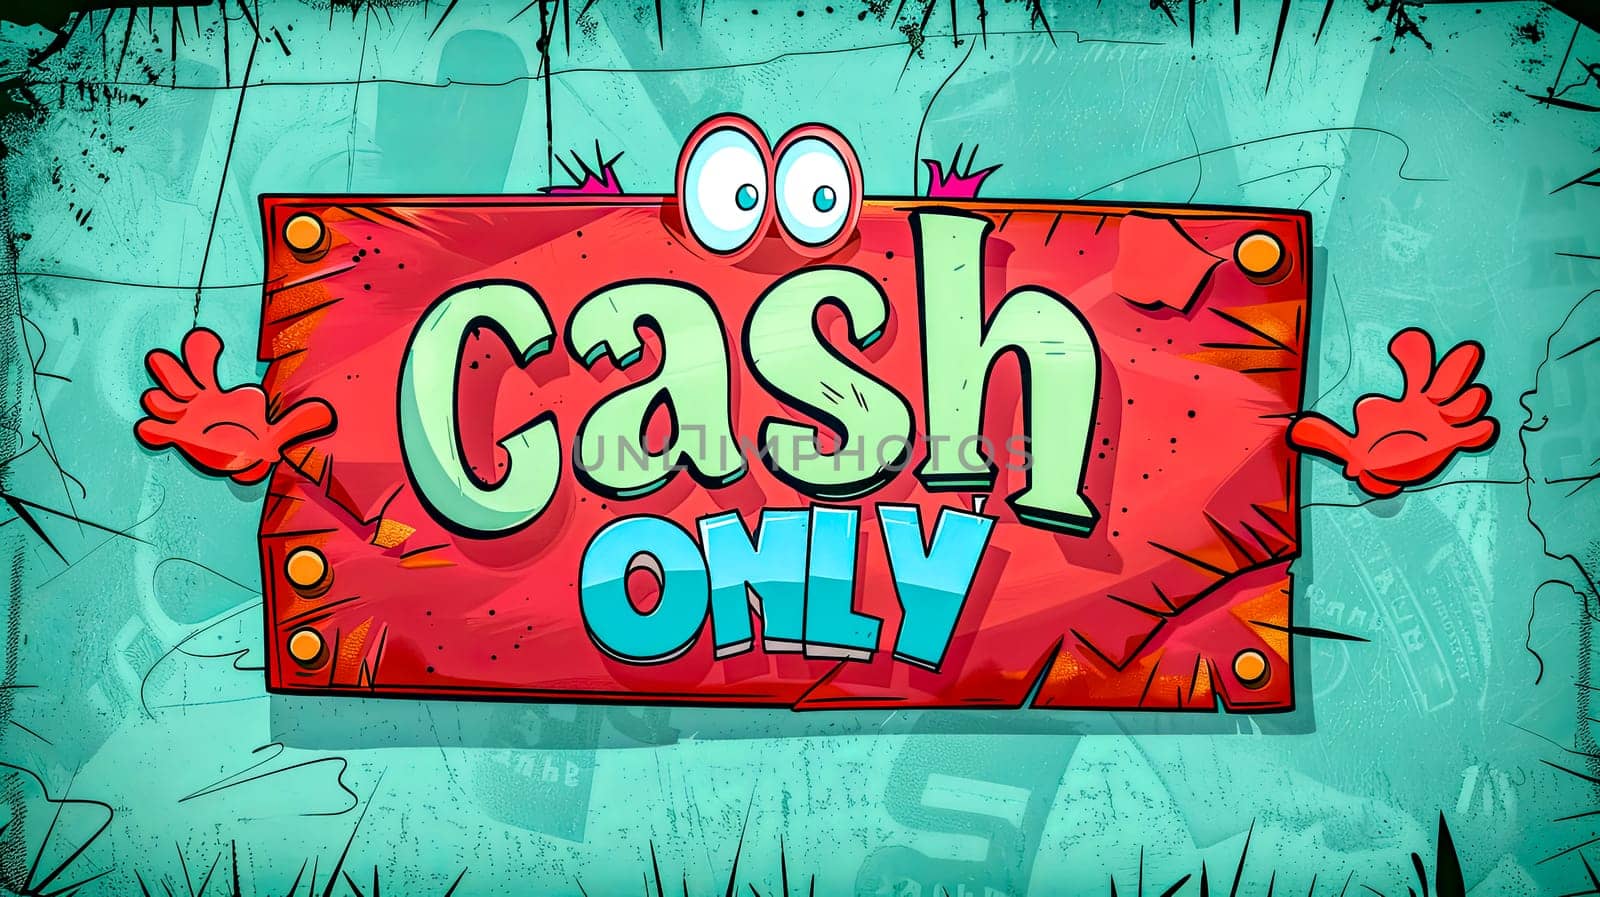 Cash only sign with cartoon eyes and hands by Edophoto